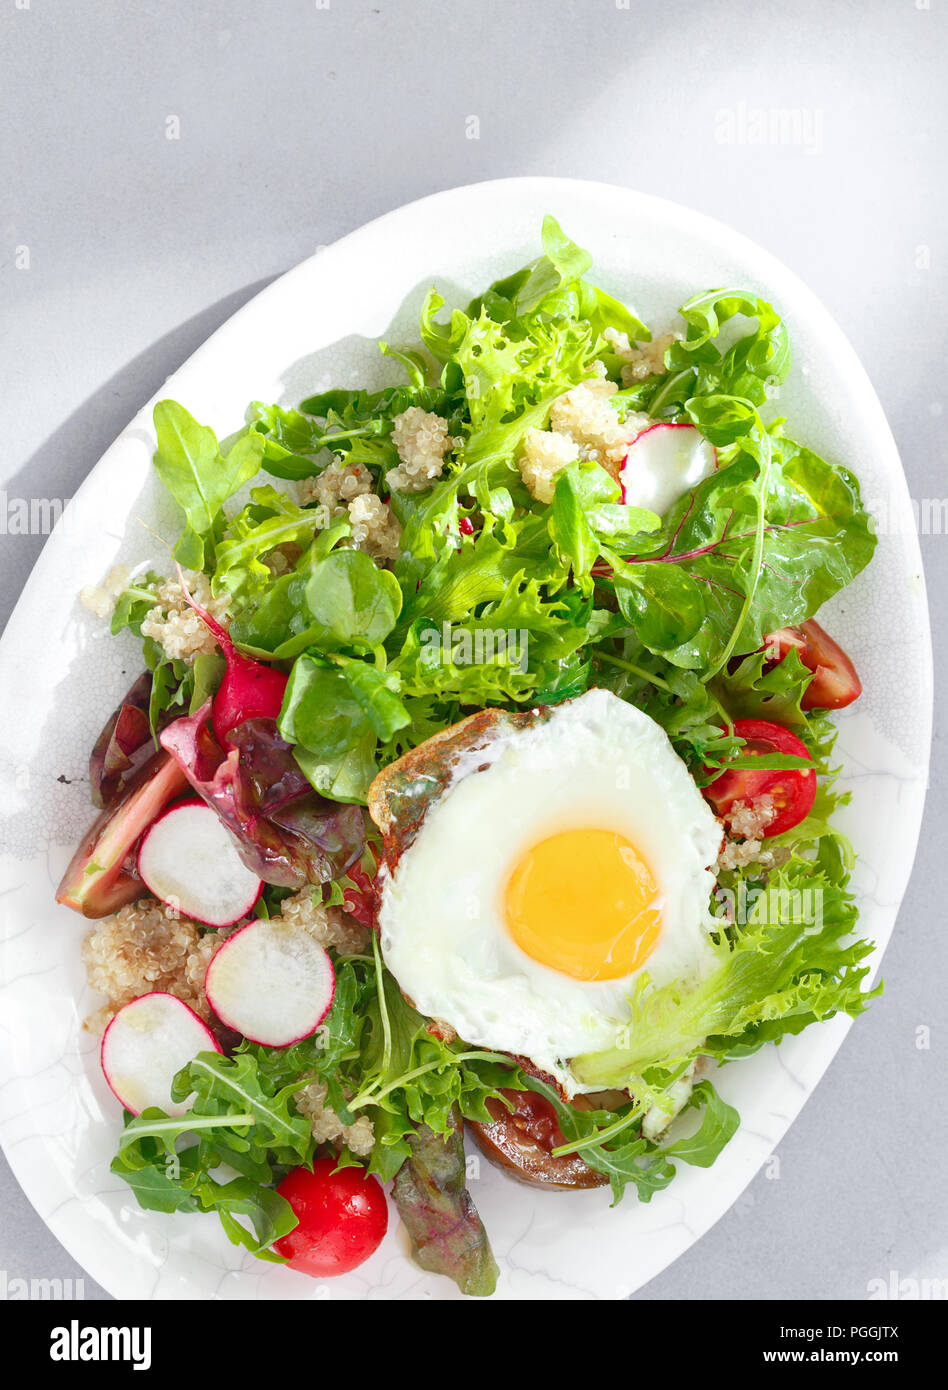 Plate fresh salad with quinoa and fried egg on gray concrete background top view. Healthy food clean eating Stock Photo